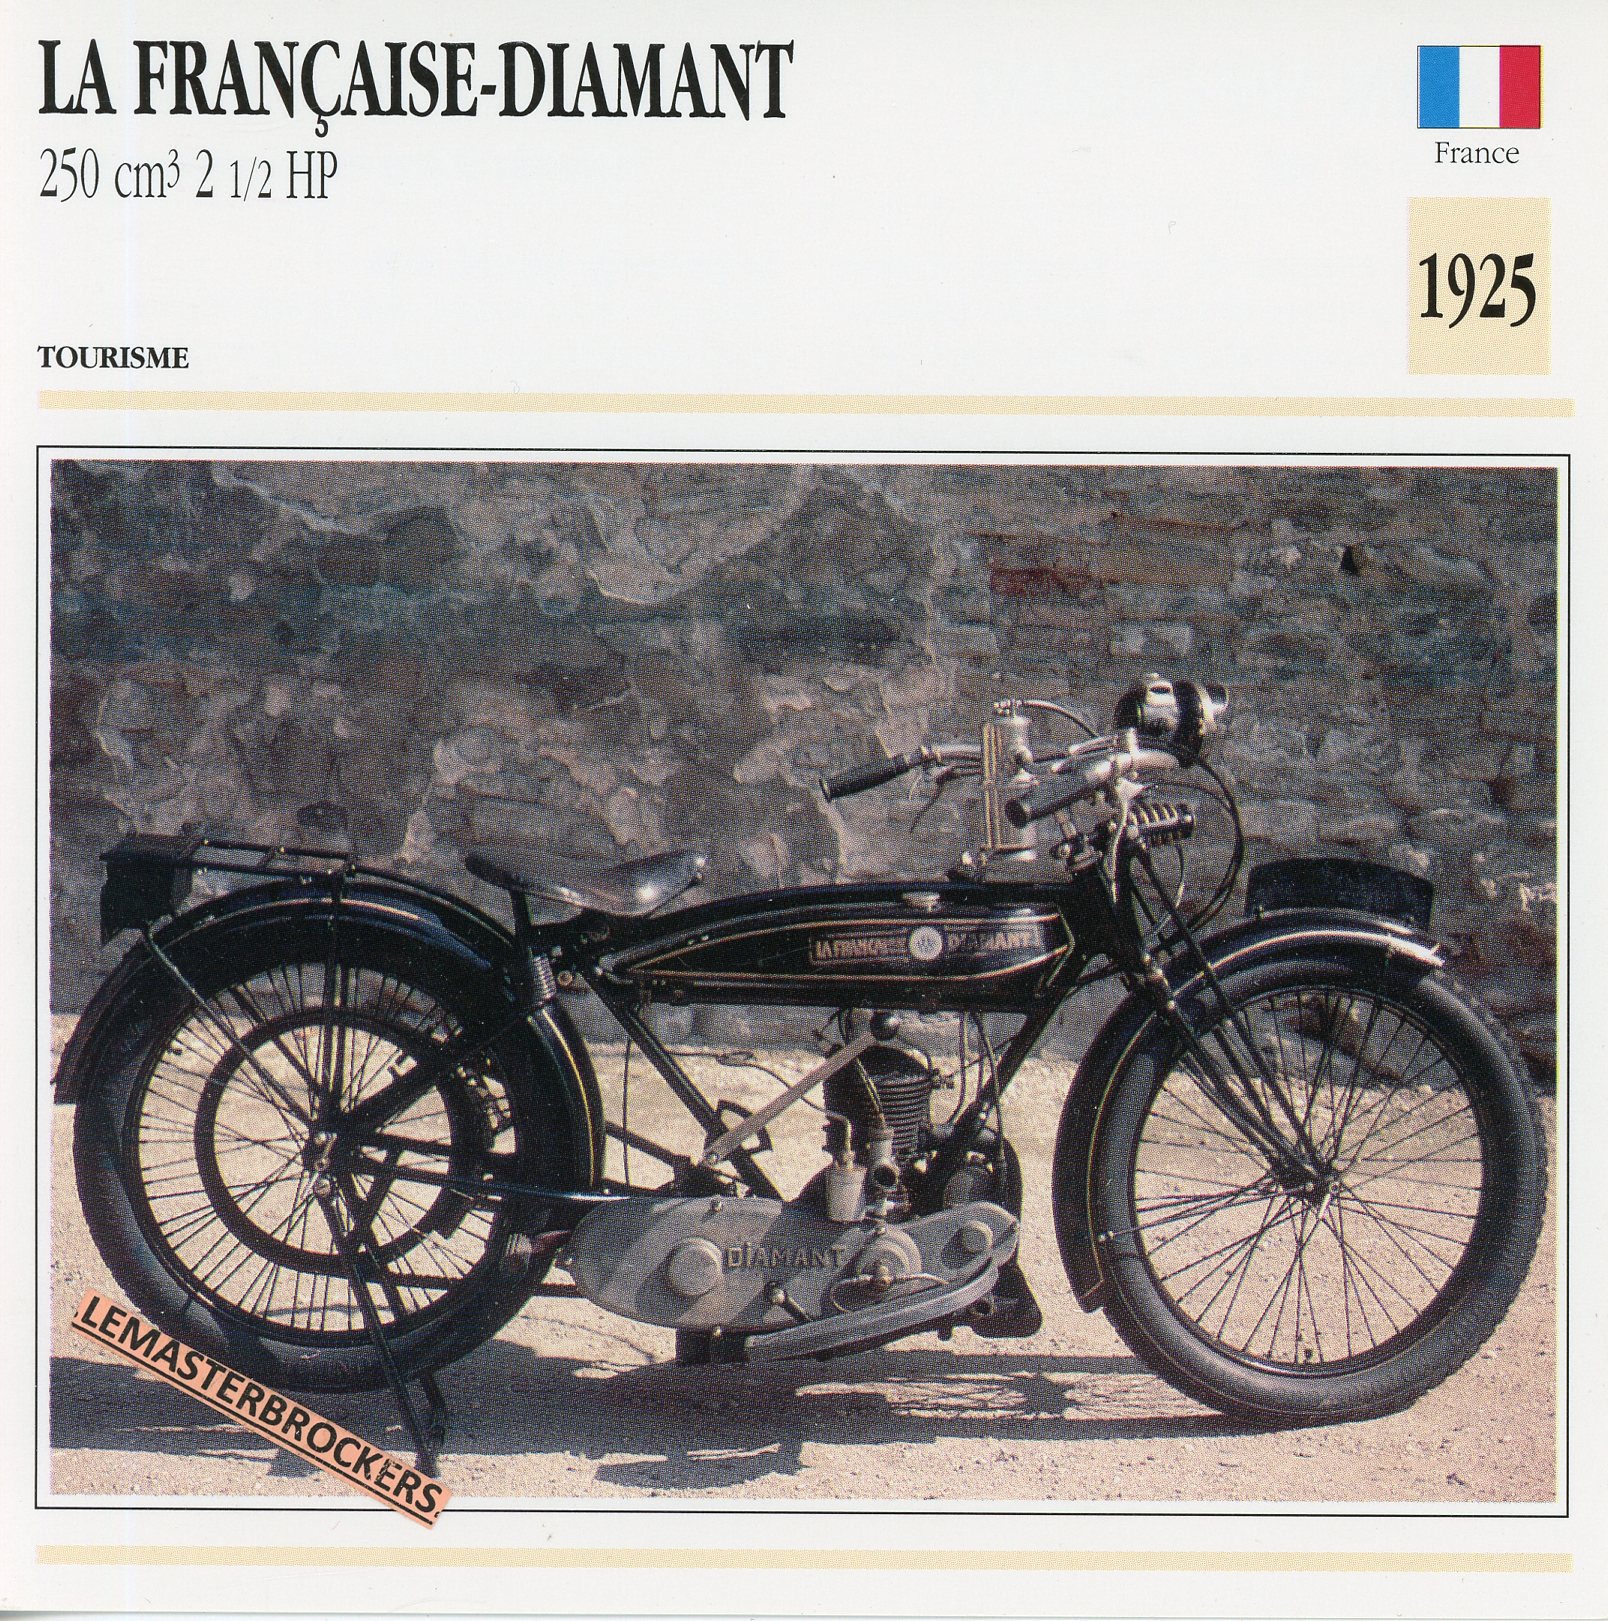 LAFRANCAISE-DIAMANT-1925-FICHE-SCOOTER-MOTORCYCLE-CARDS-ATLAS-LEMASTERBROCKERS